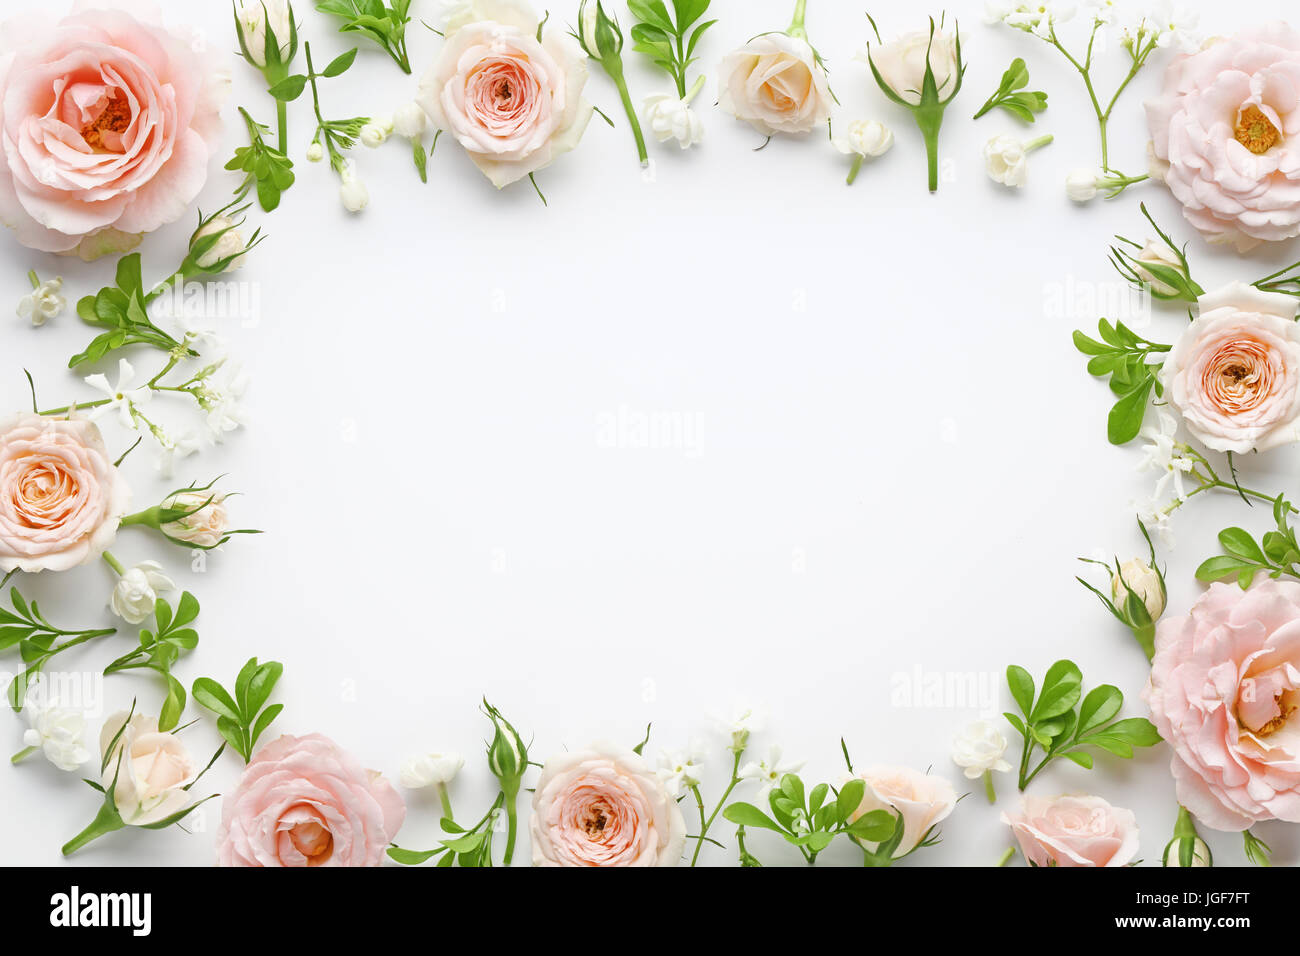 pink roses on white background Stock Photo